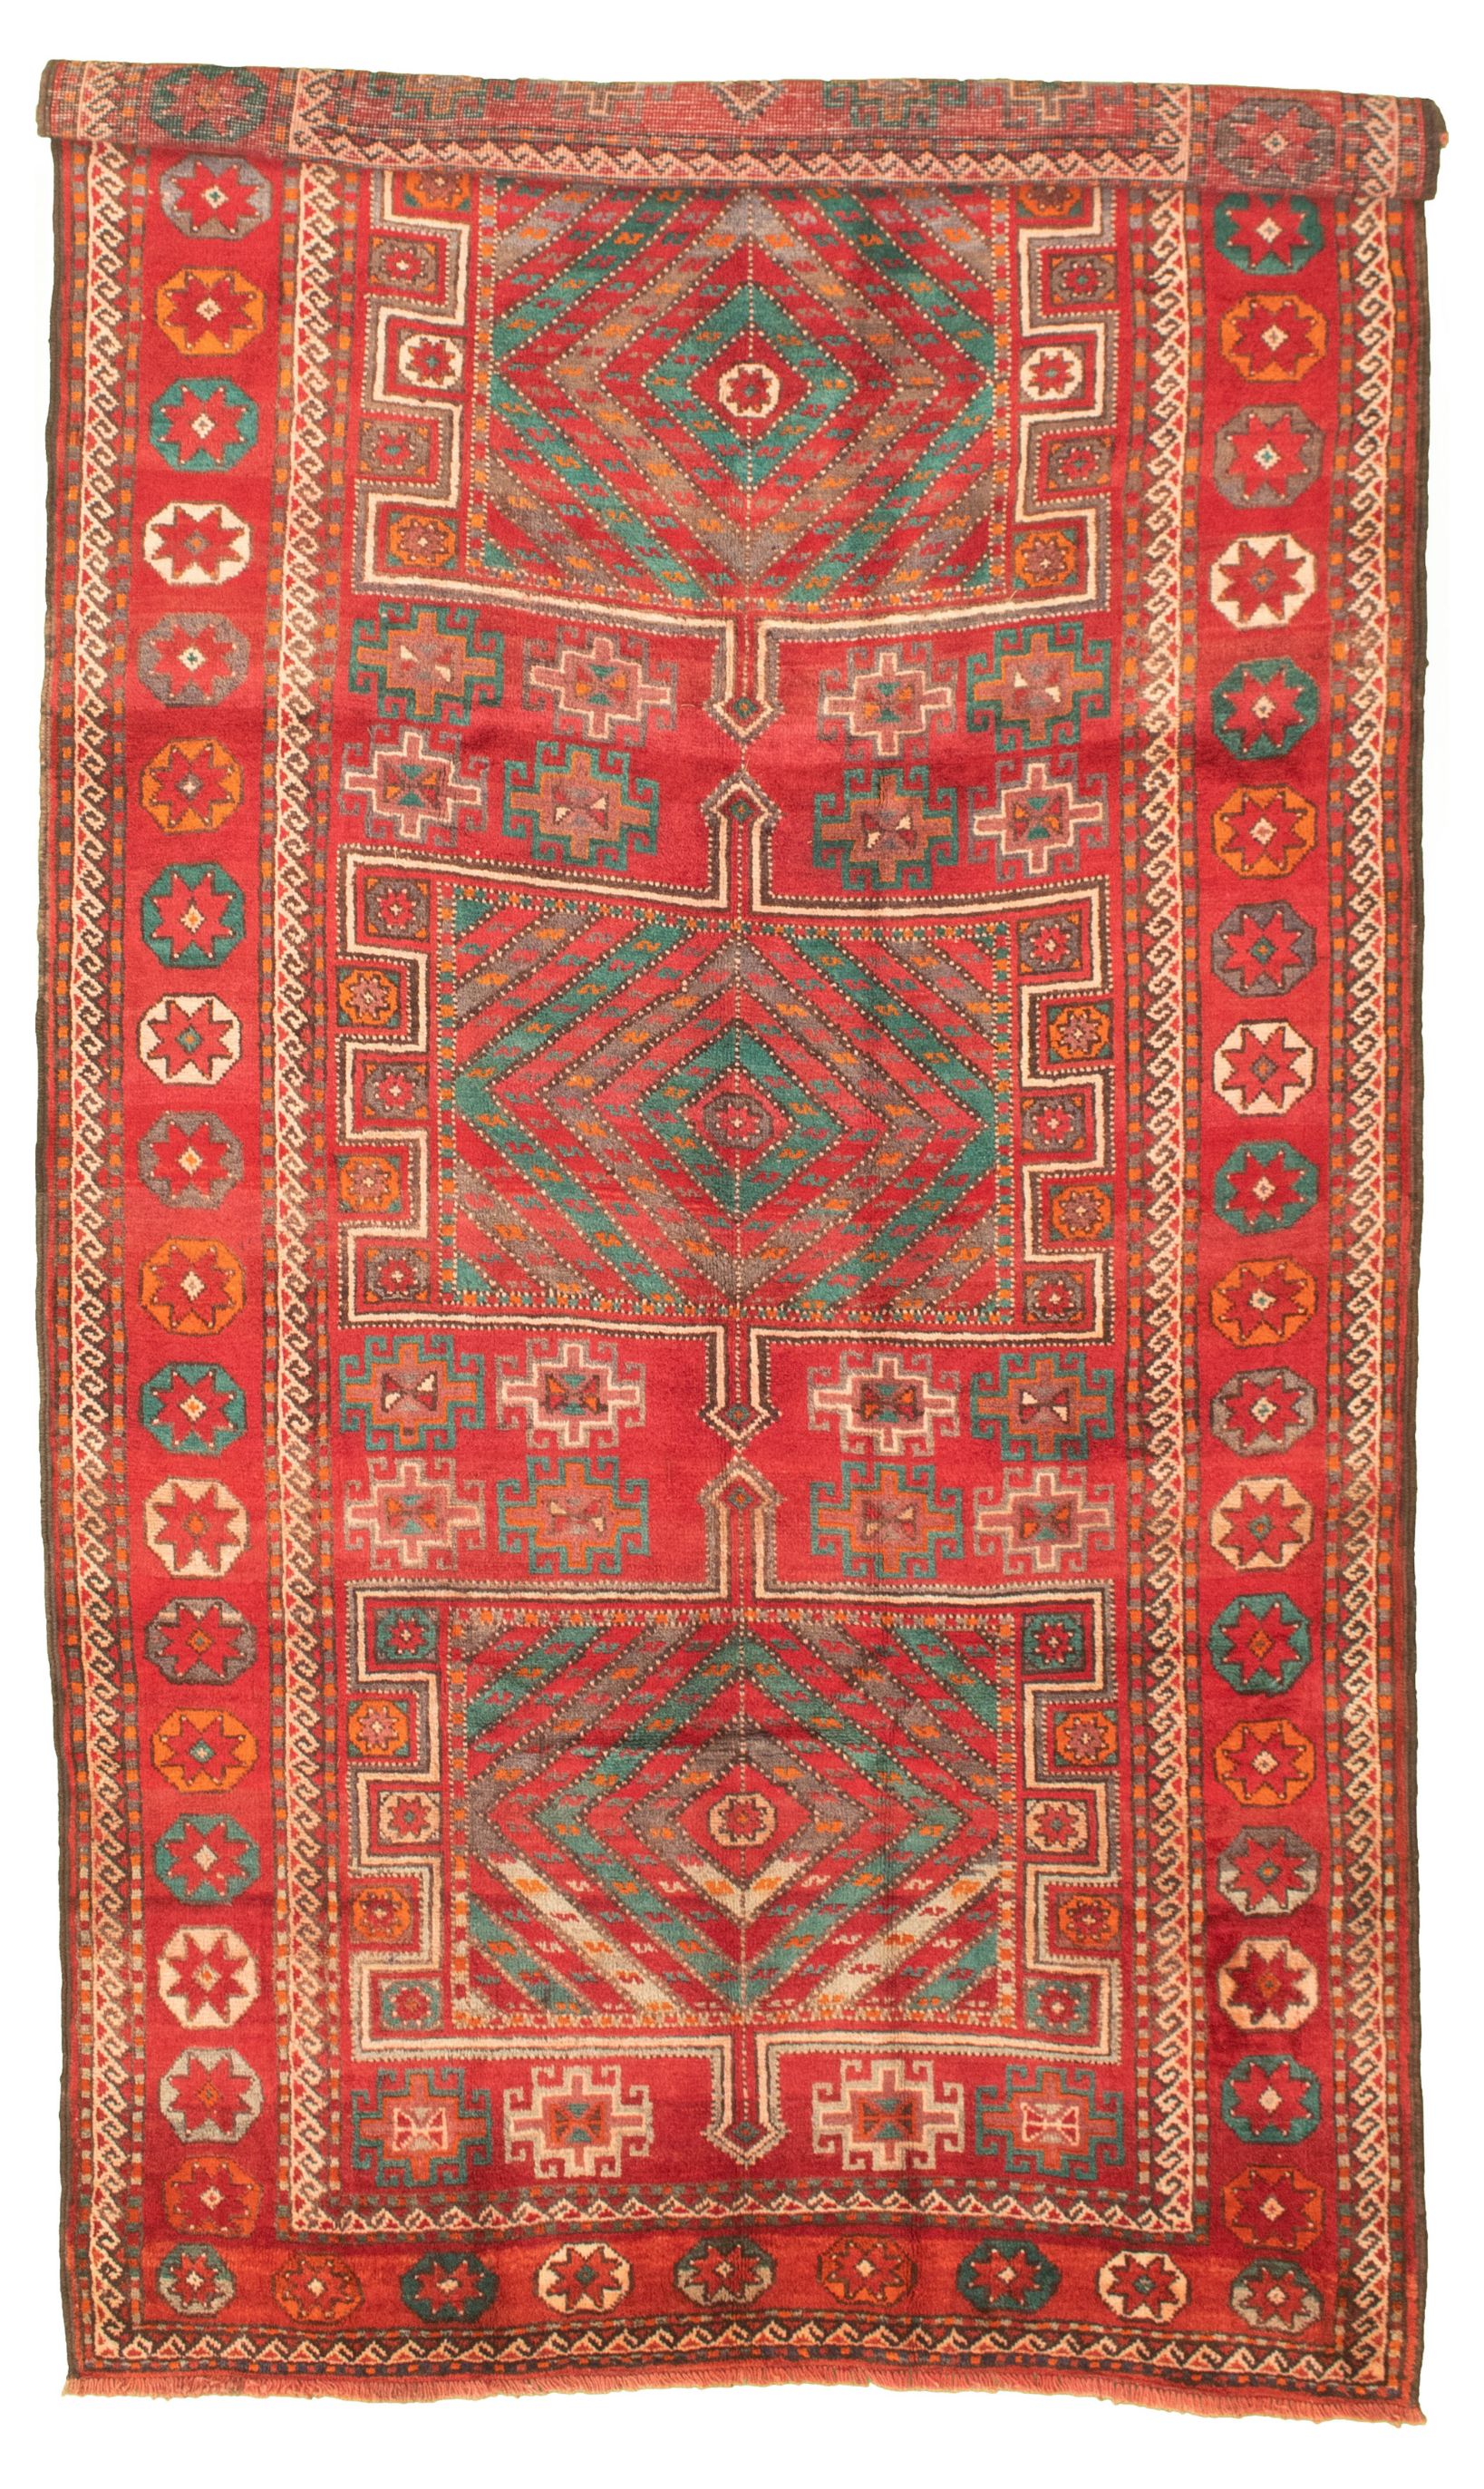 Hand-knotted Authentic Turkish Red Wool Rug 5'3" x 10'5" Size: 5'3" x 10'5"  